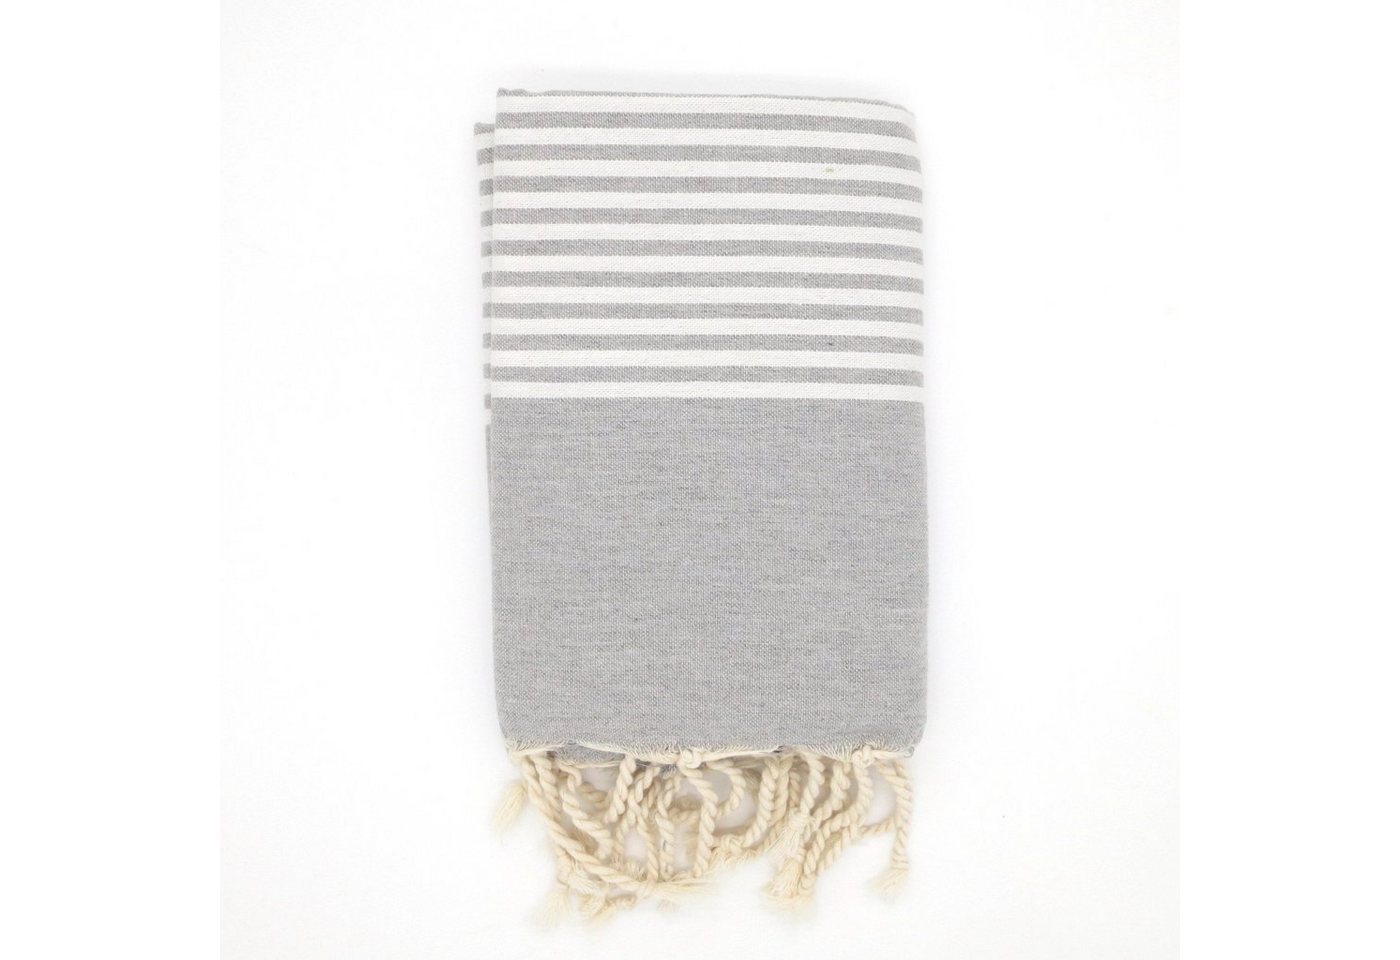 Cotonway Hamamtuch Fouta Fala, 100% recycling Baumwolle von Cotonway